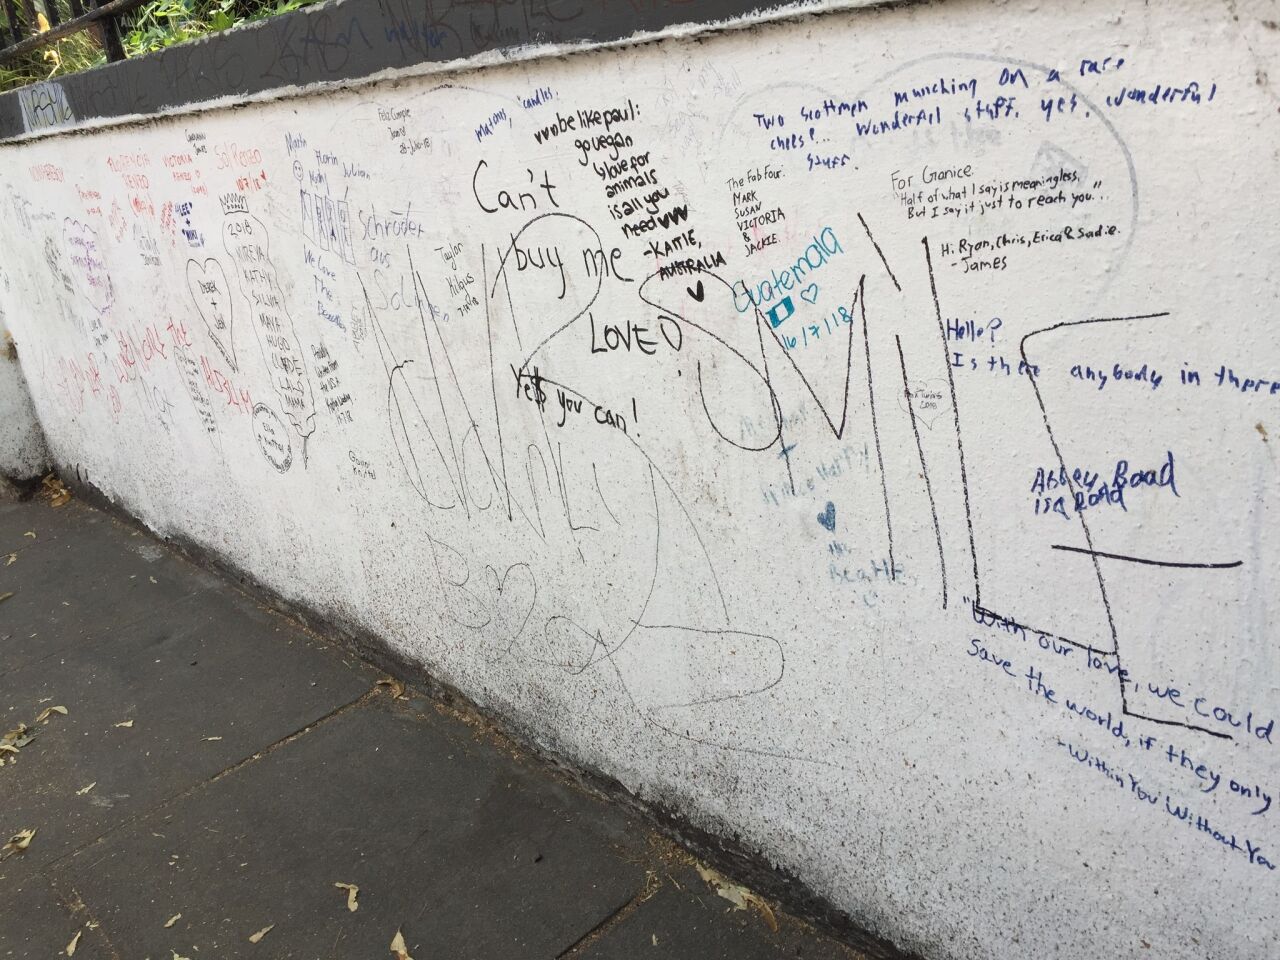 The exterior wall of Abbey Road Studios where fans are invited to write messages or sign their names.